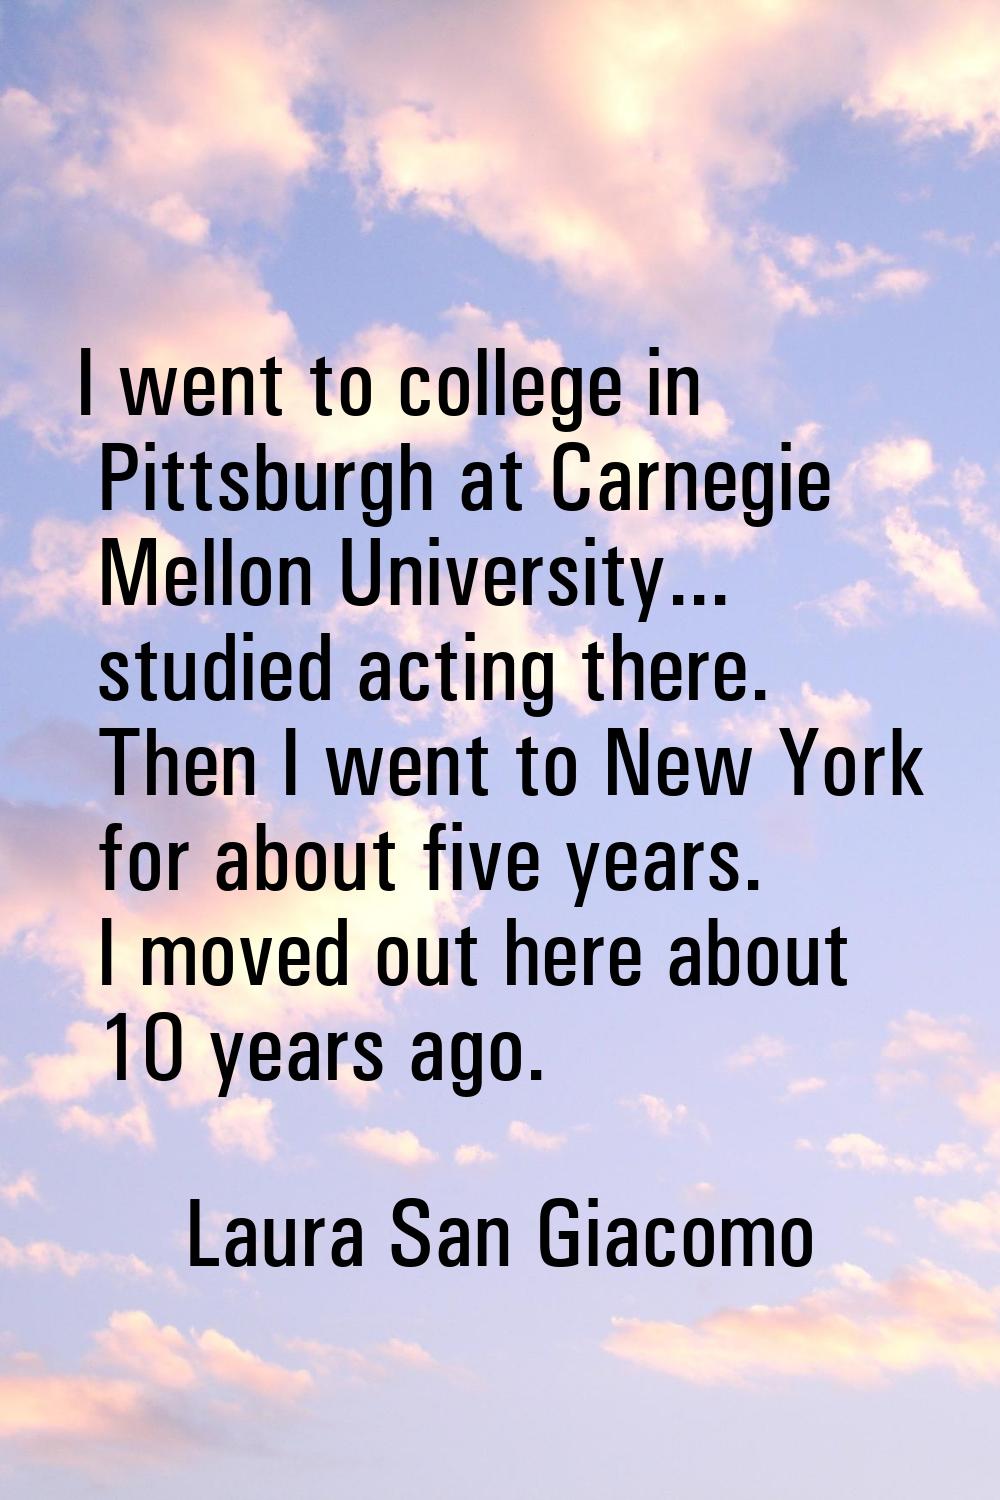 I went to college in Pittsburgh at Carnegie Mellon University... studied acting there. Then I went 